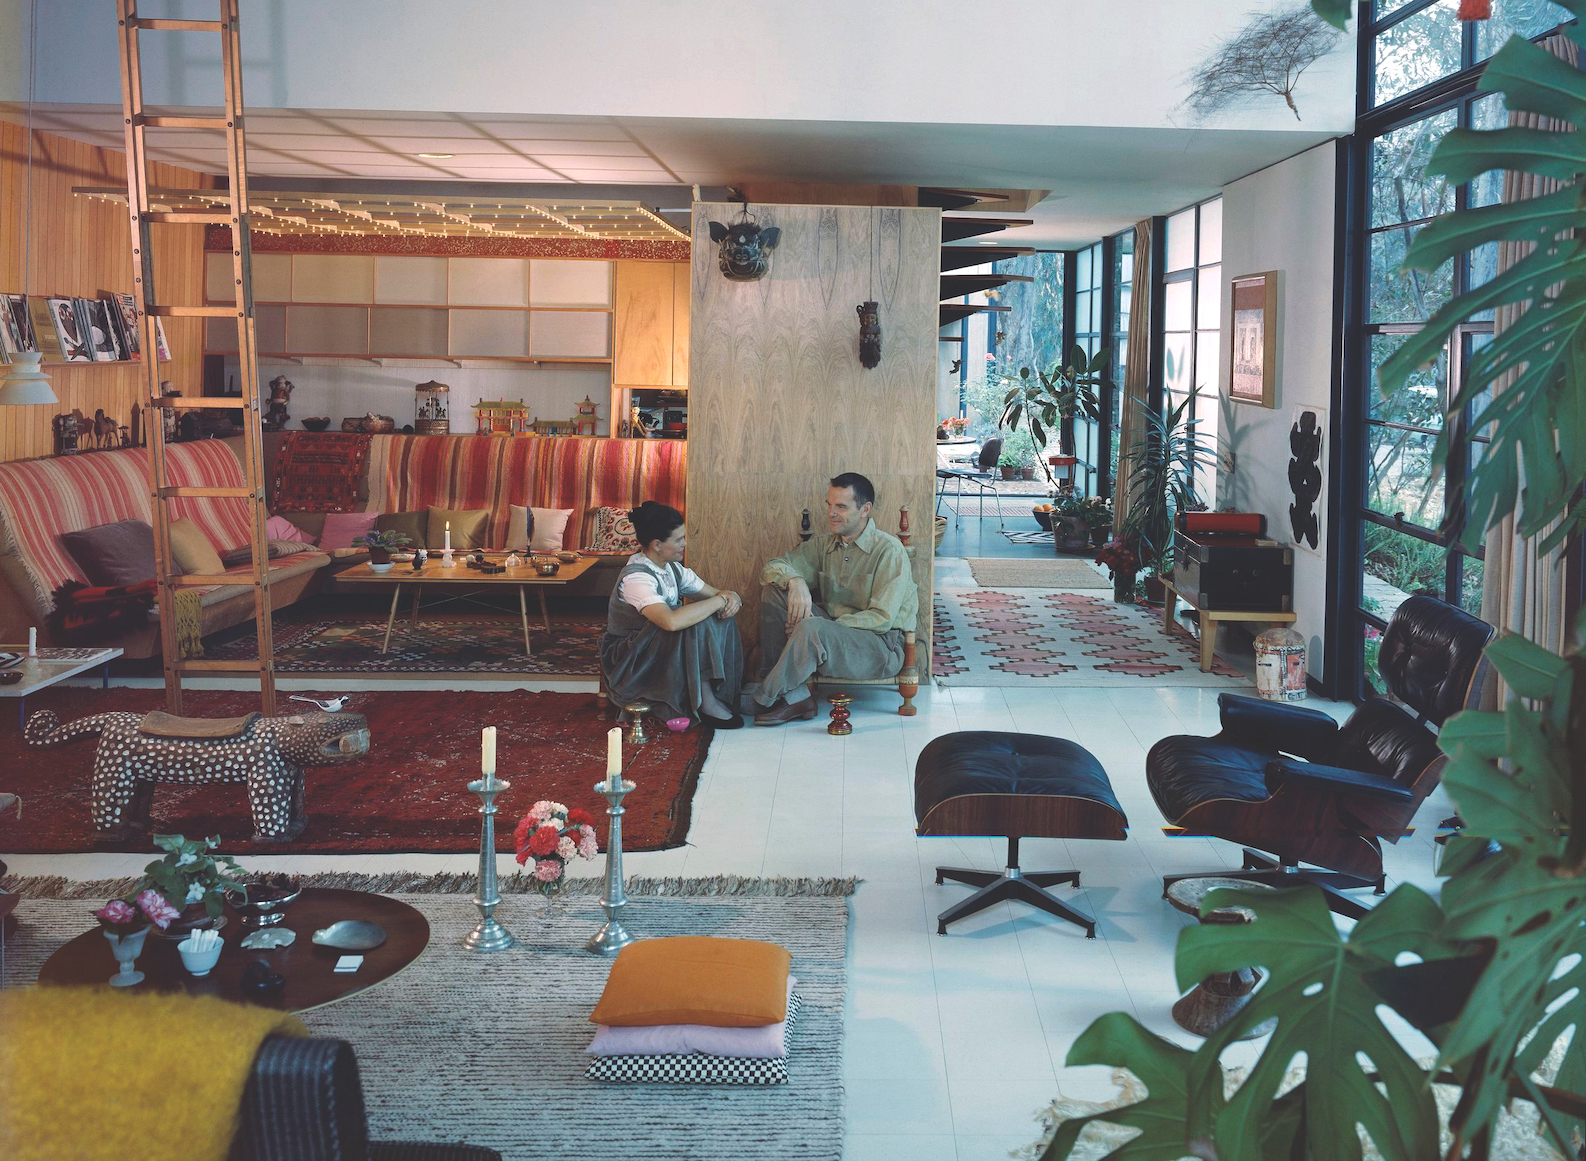 The struggle to save the Eames House - DesignCurial